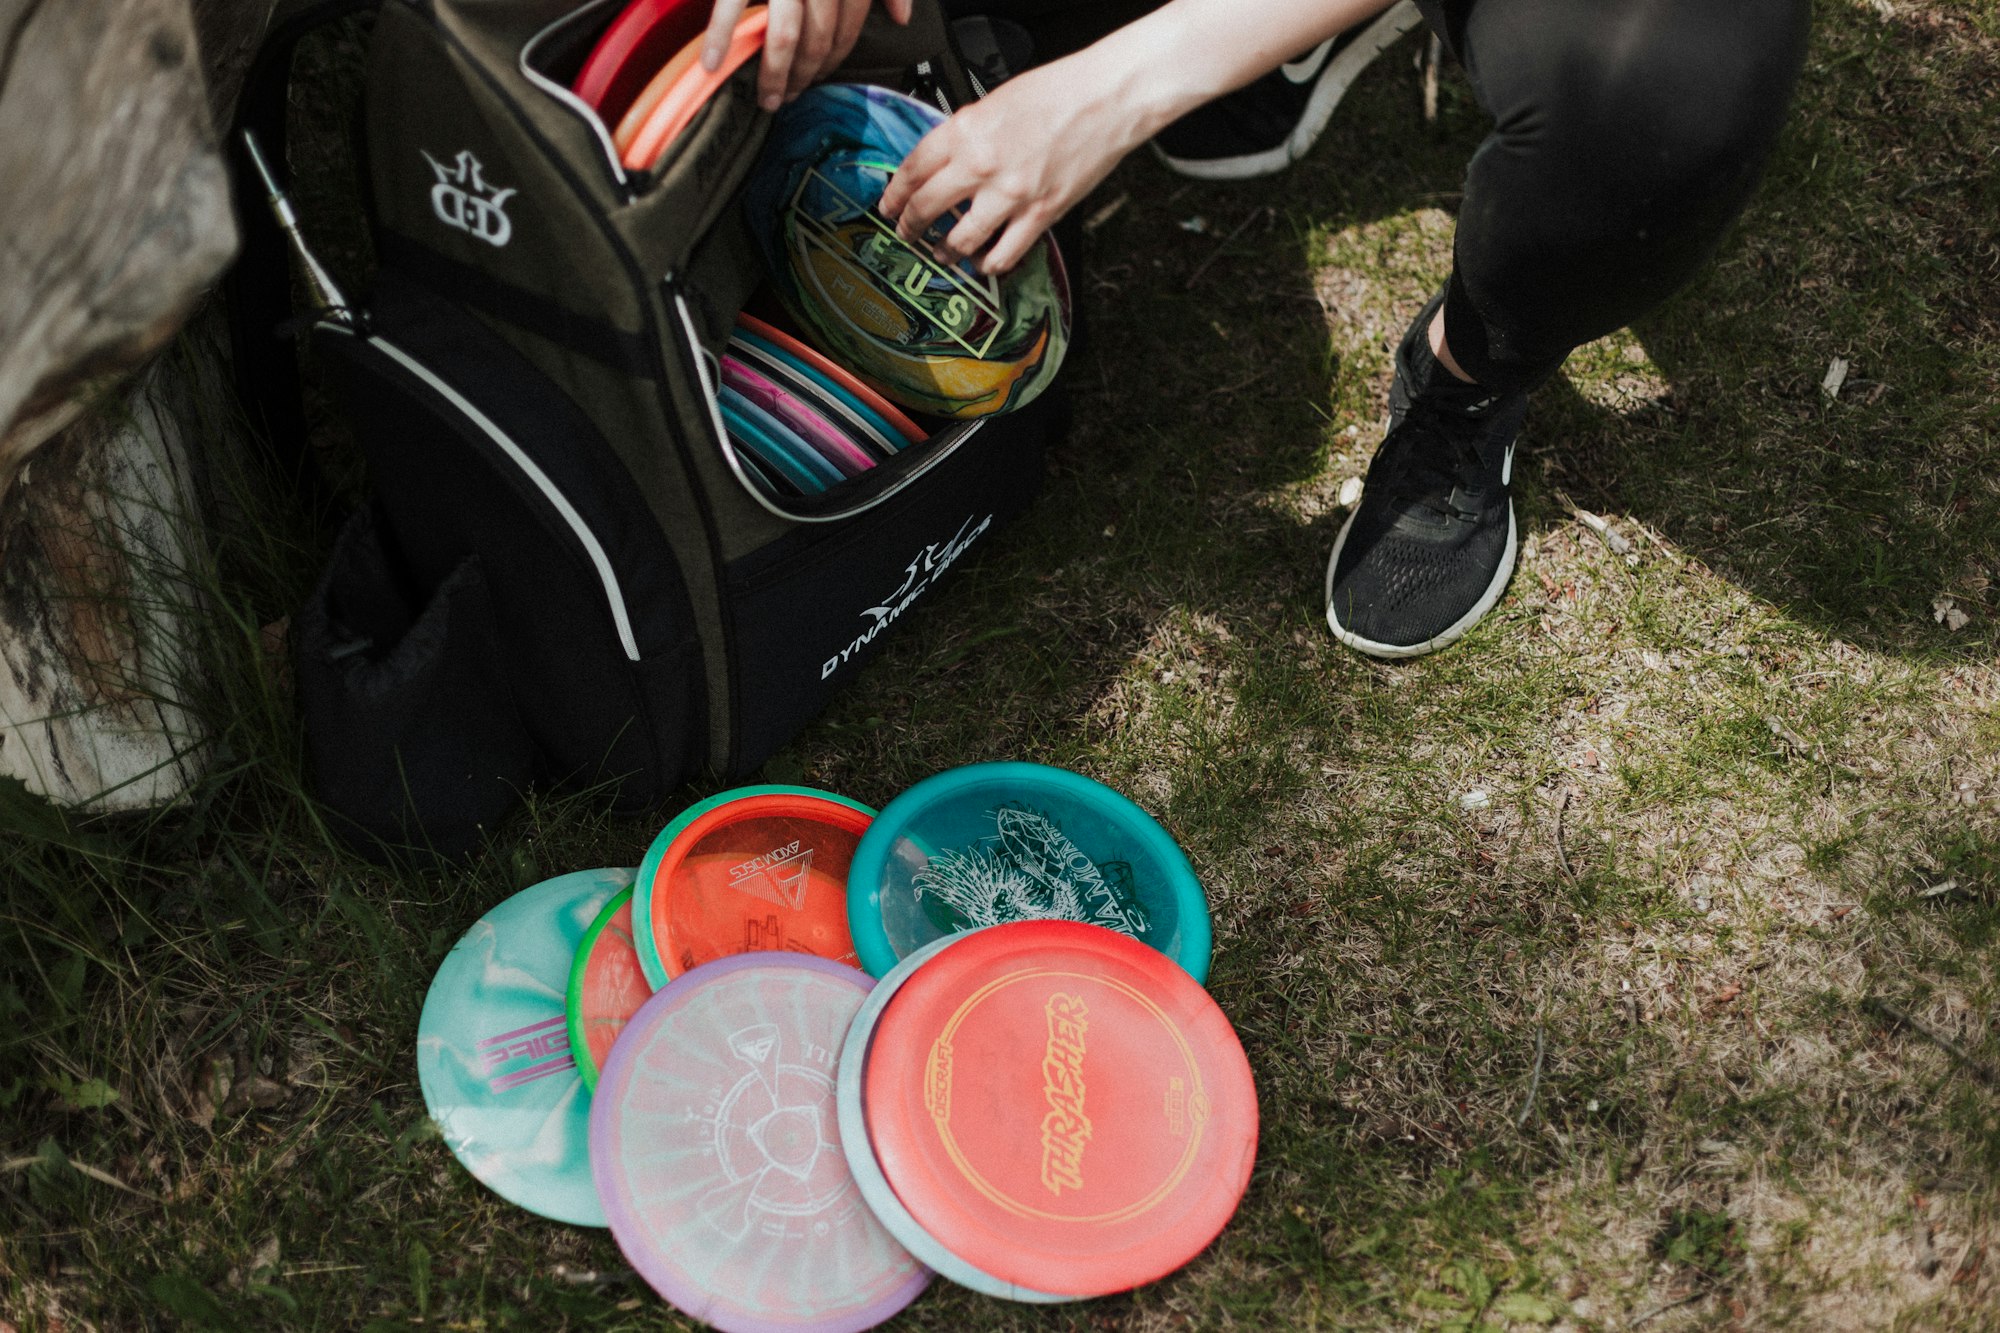 A disc golf starter set with discs, bag and mini marker